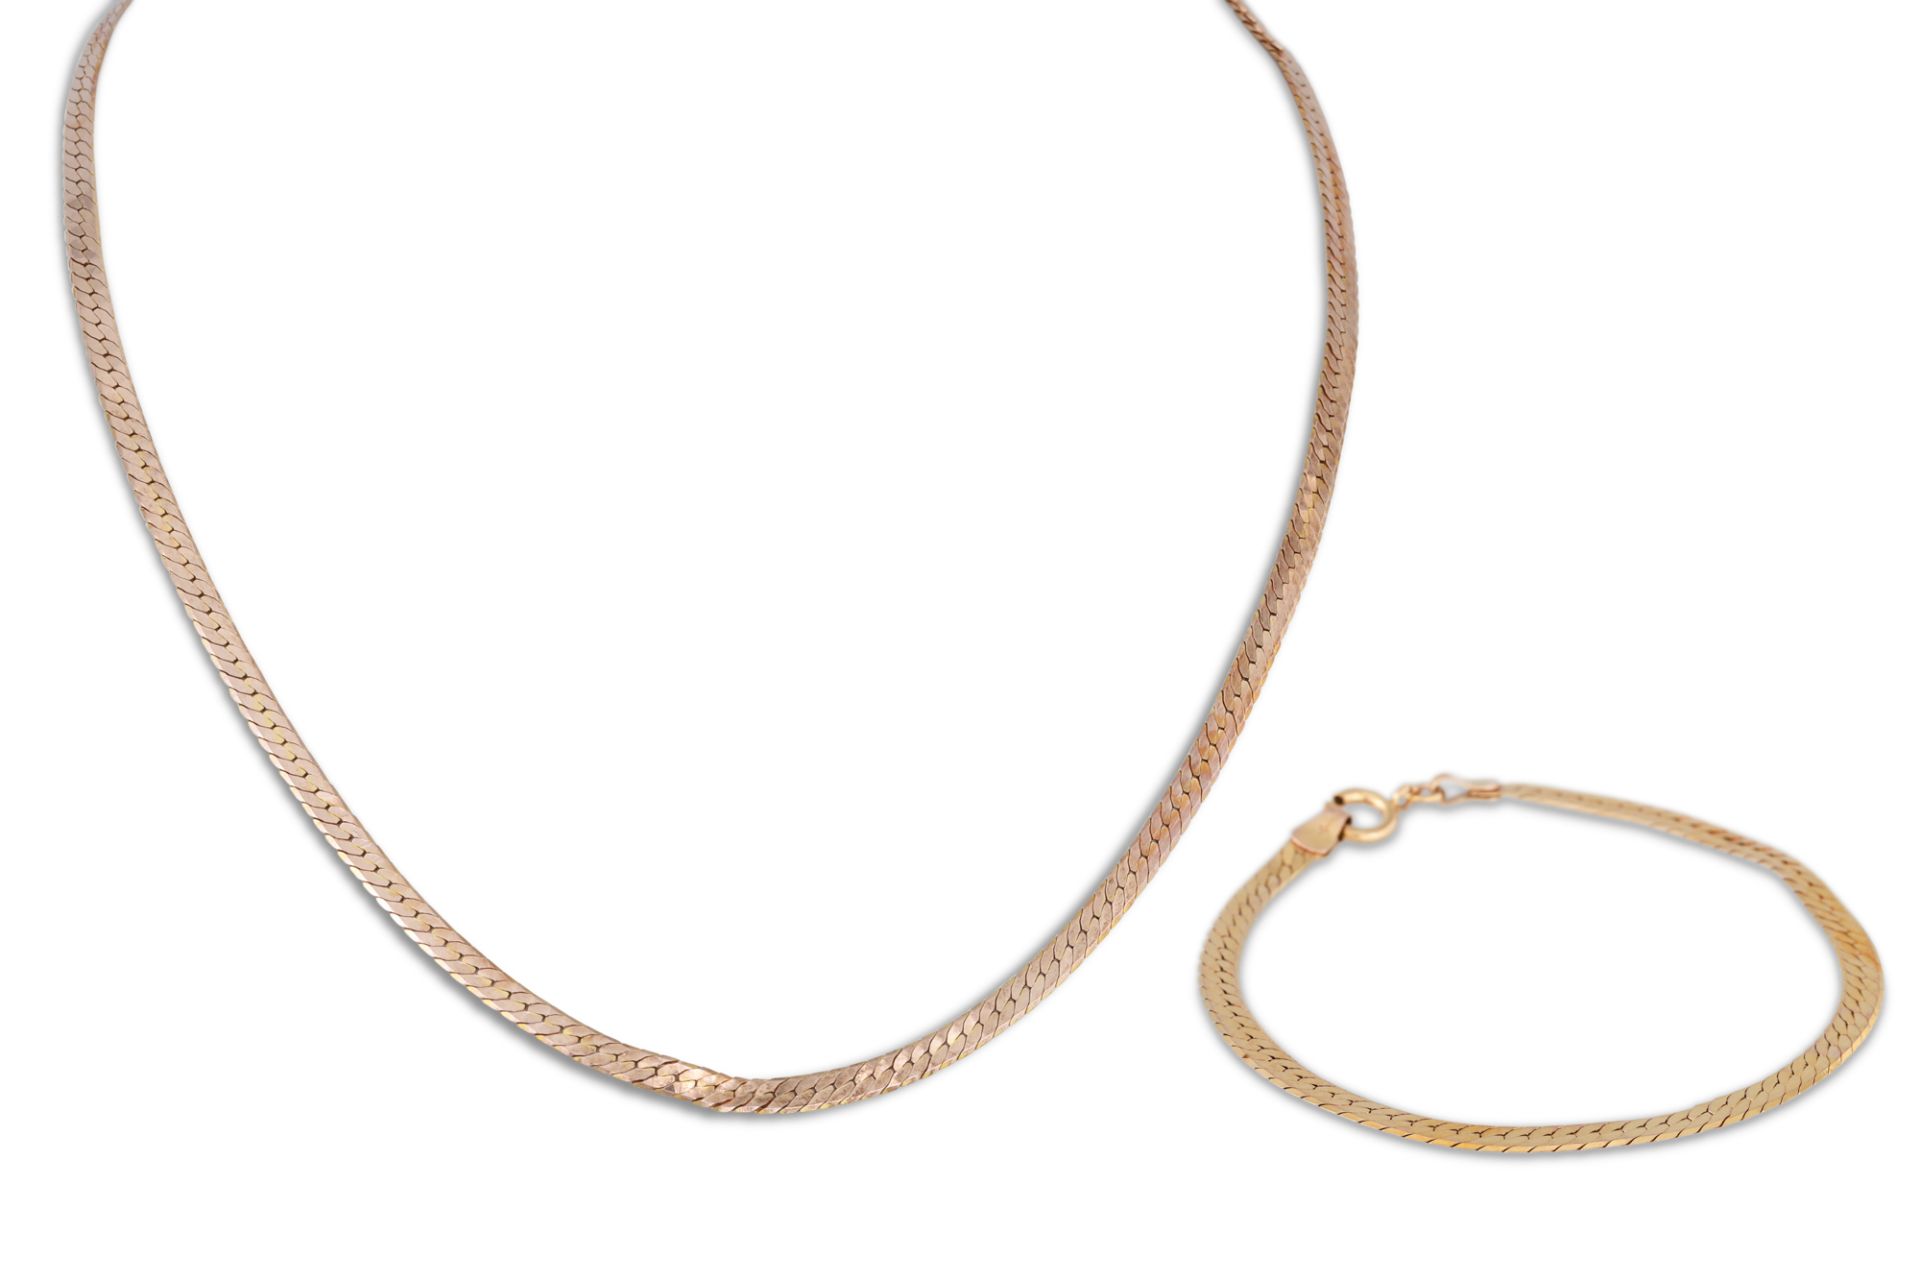 A 9CT GOLD FLAT LINK NECKLACE, and bracelet, clasp broken, 11.2 g.